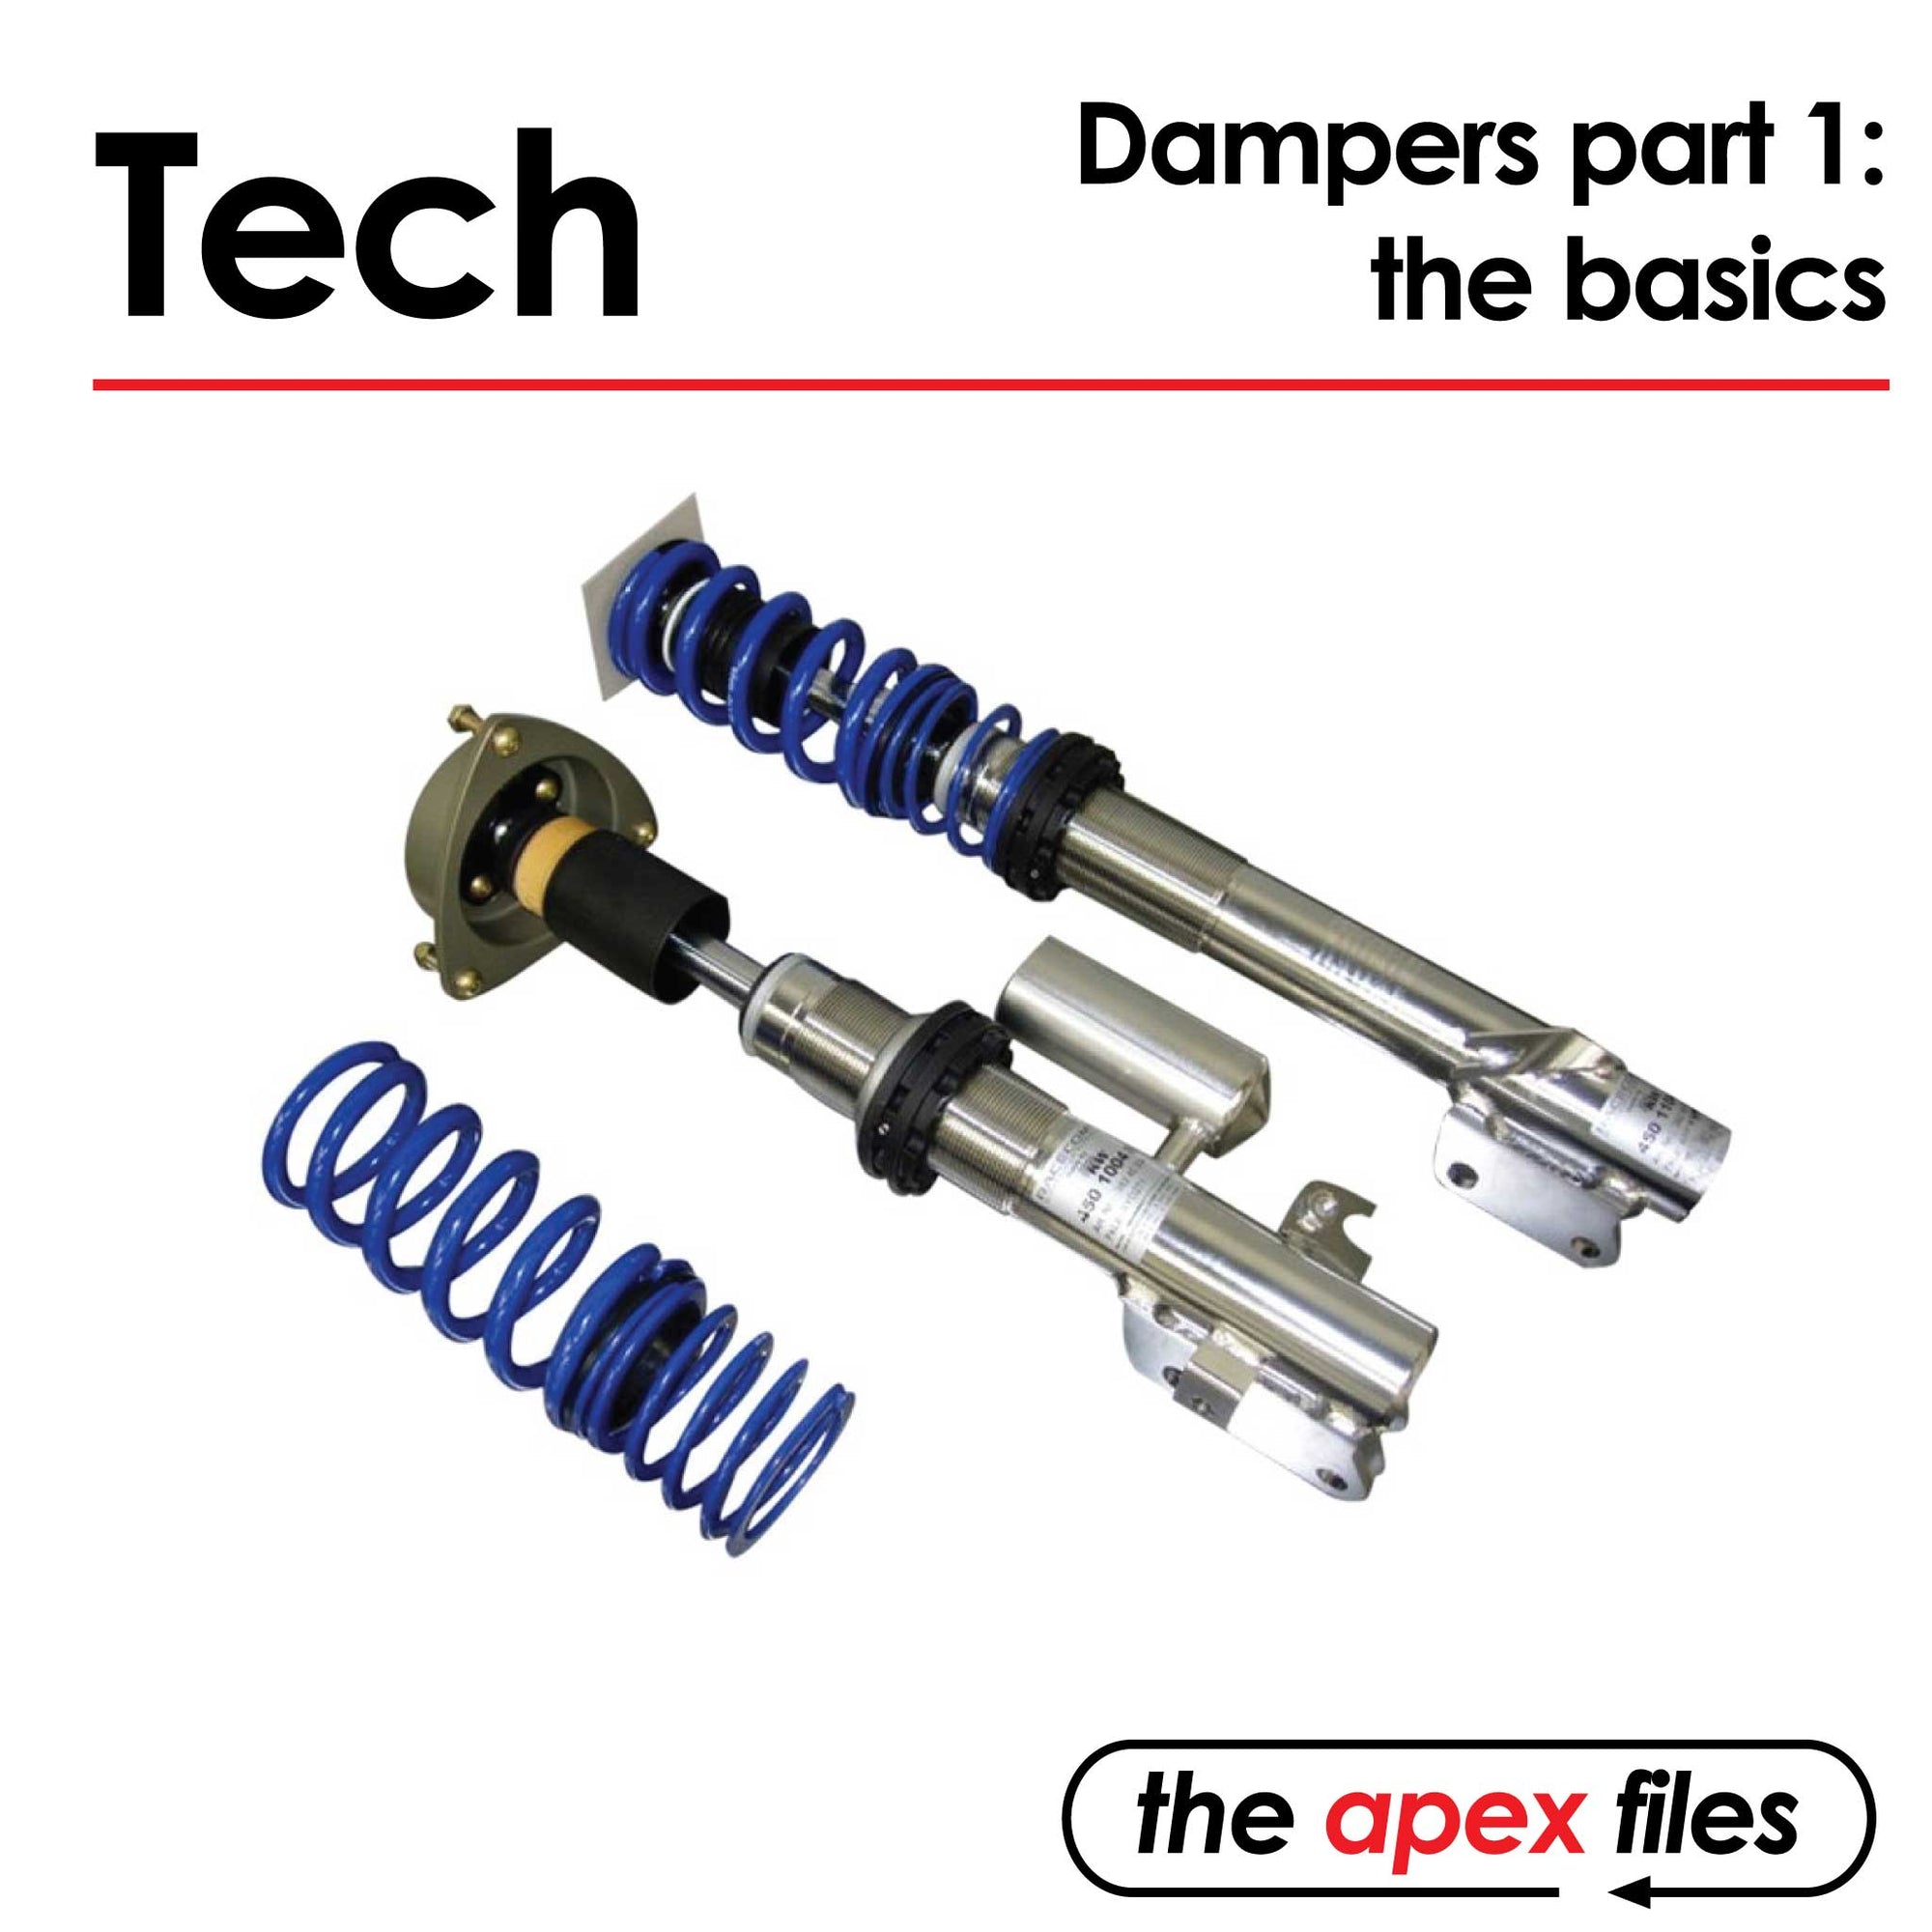 Dampers Part 1: The Basics